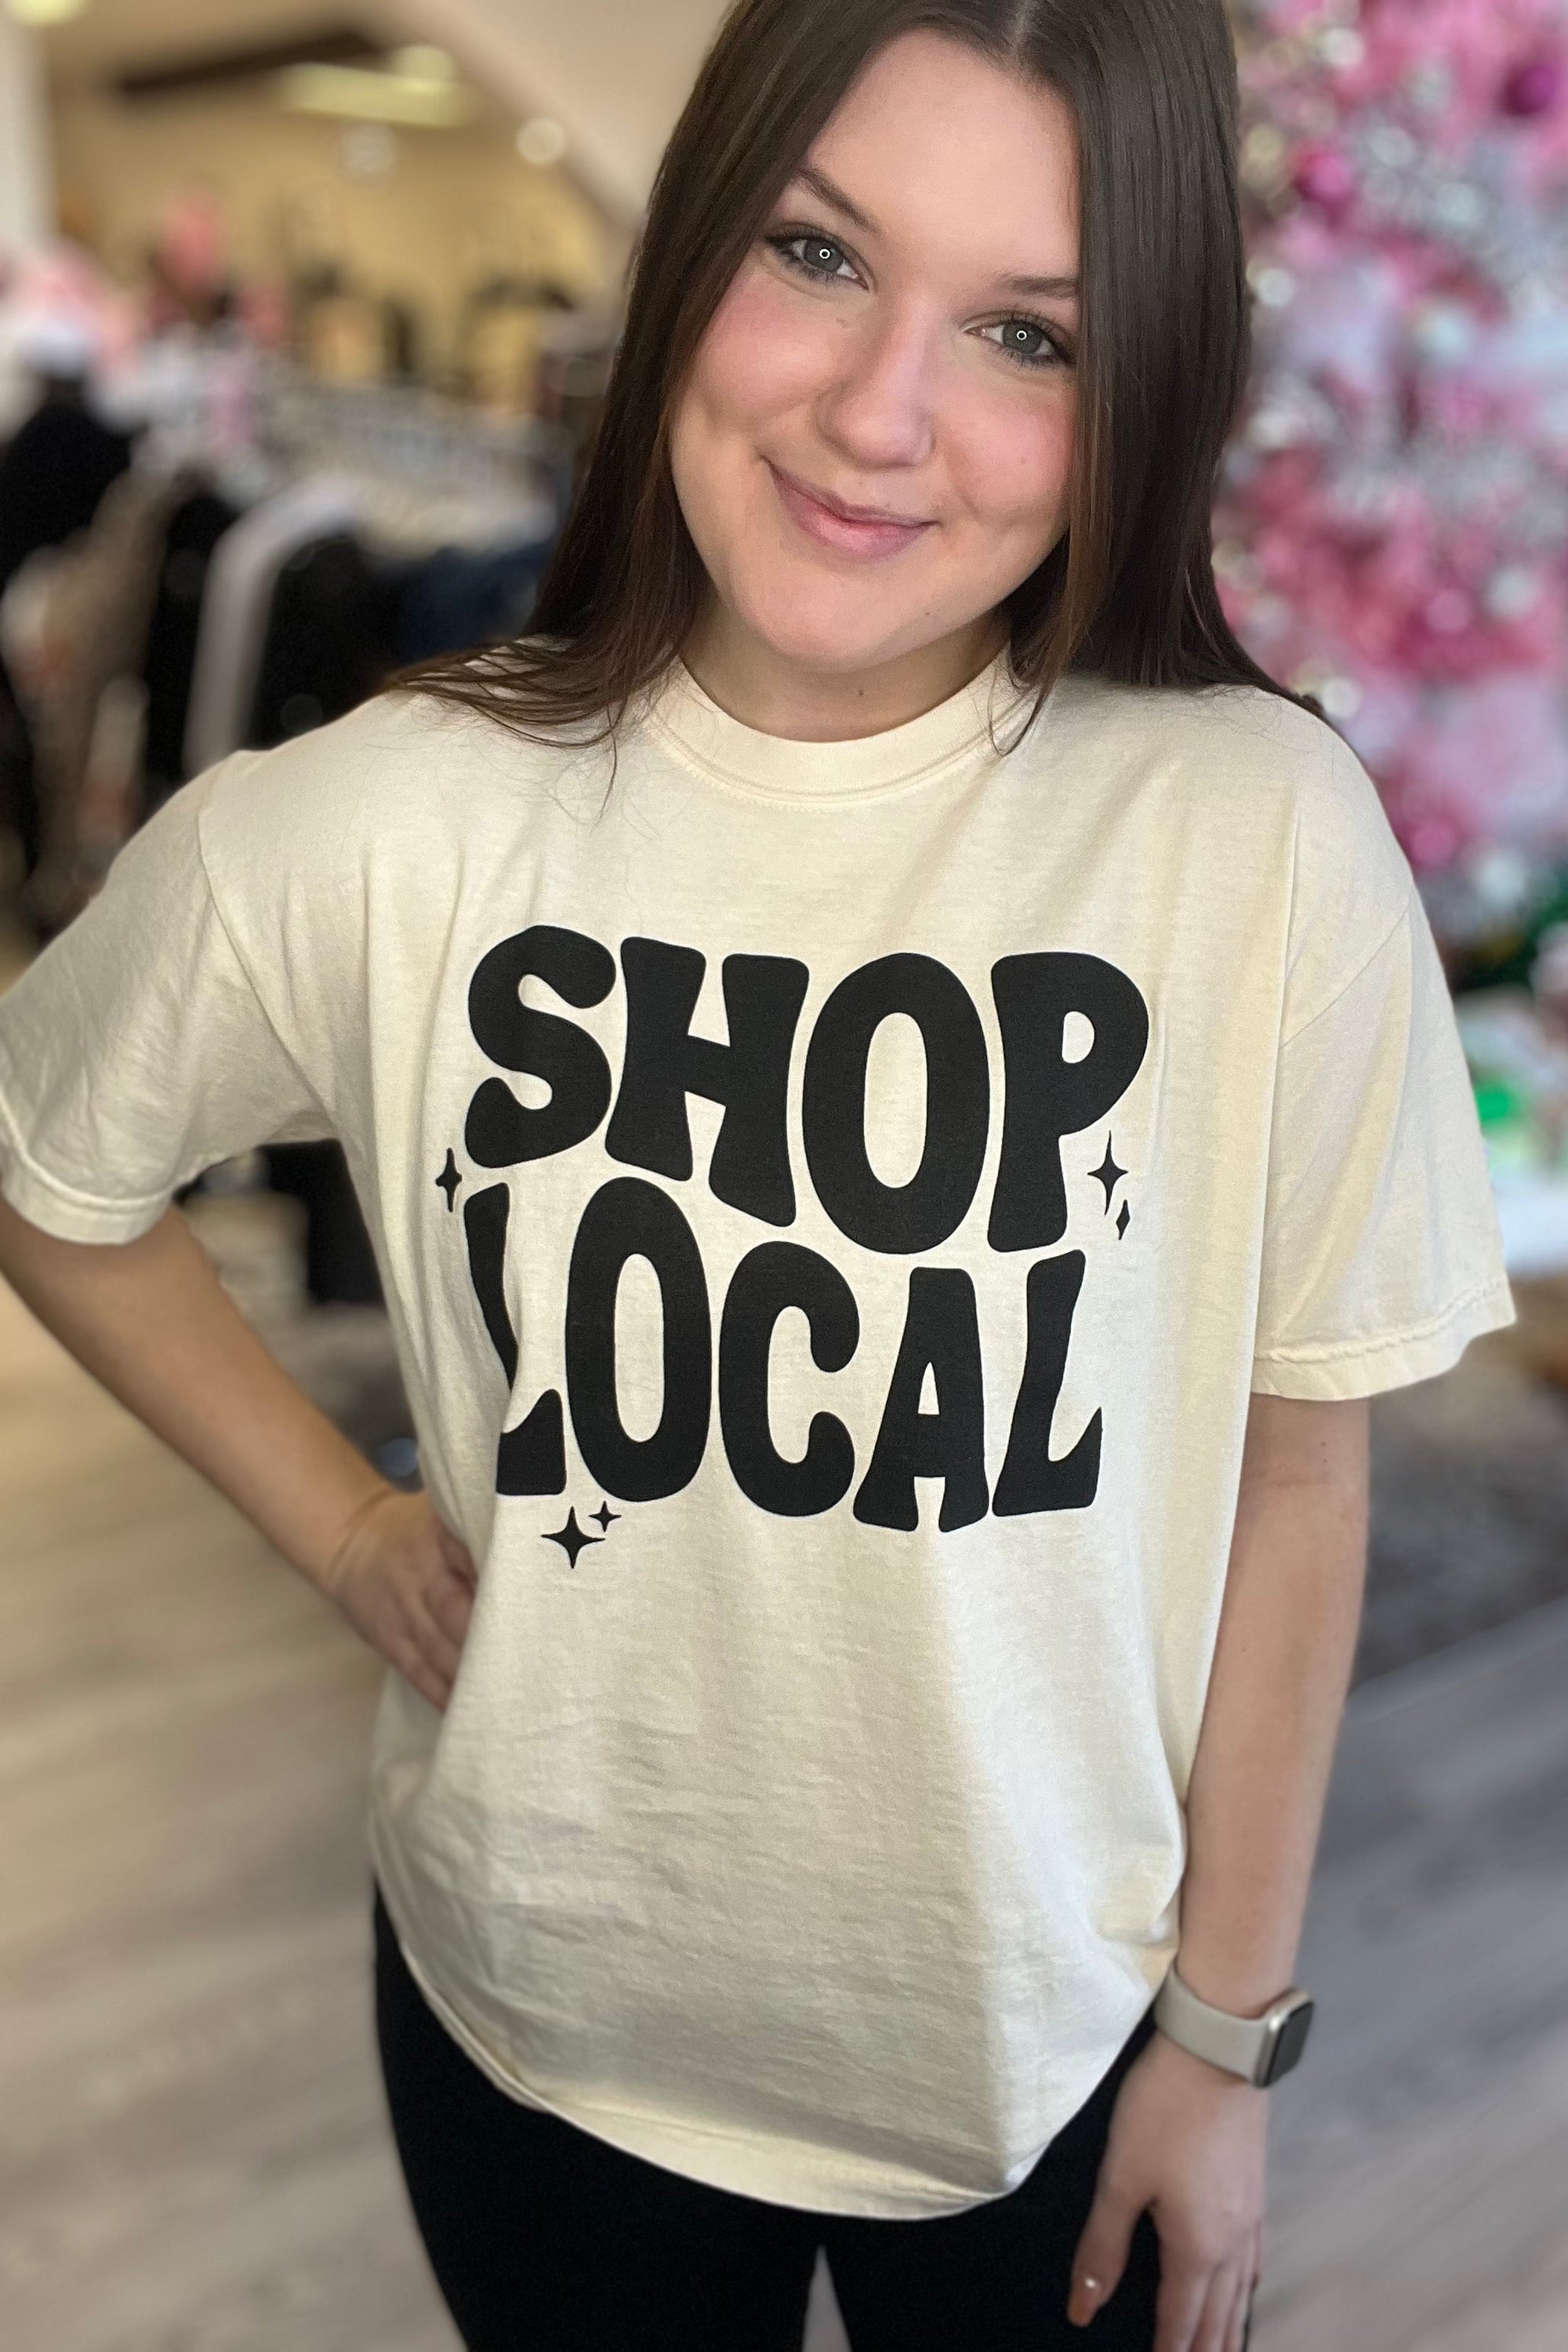 Shop Local Graphic Tee MISSY BASIC KNIT K Lane's & Co. Fashion Boutique 